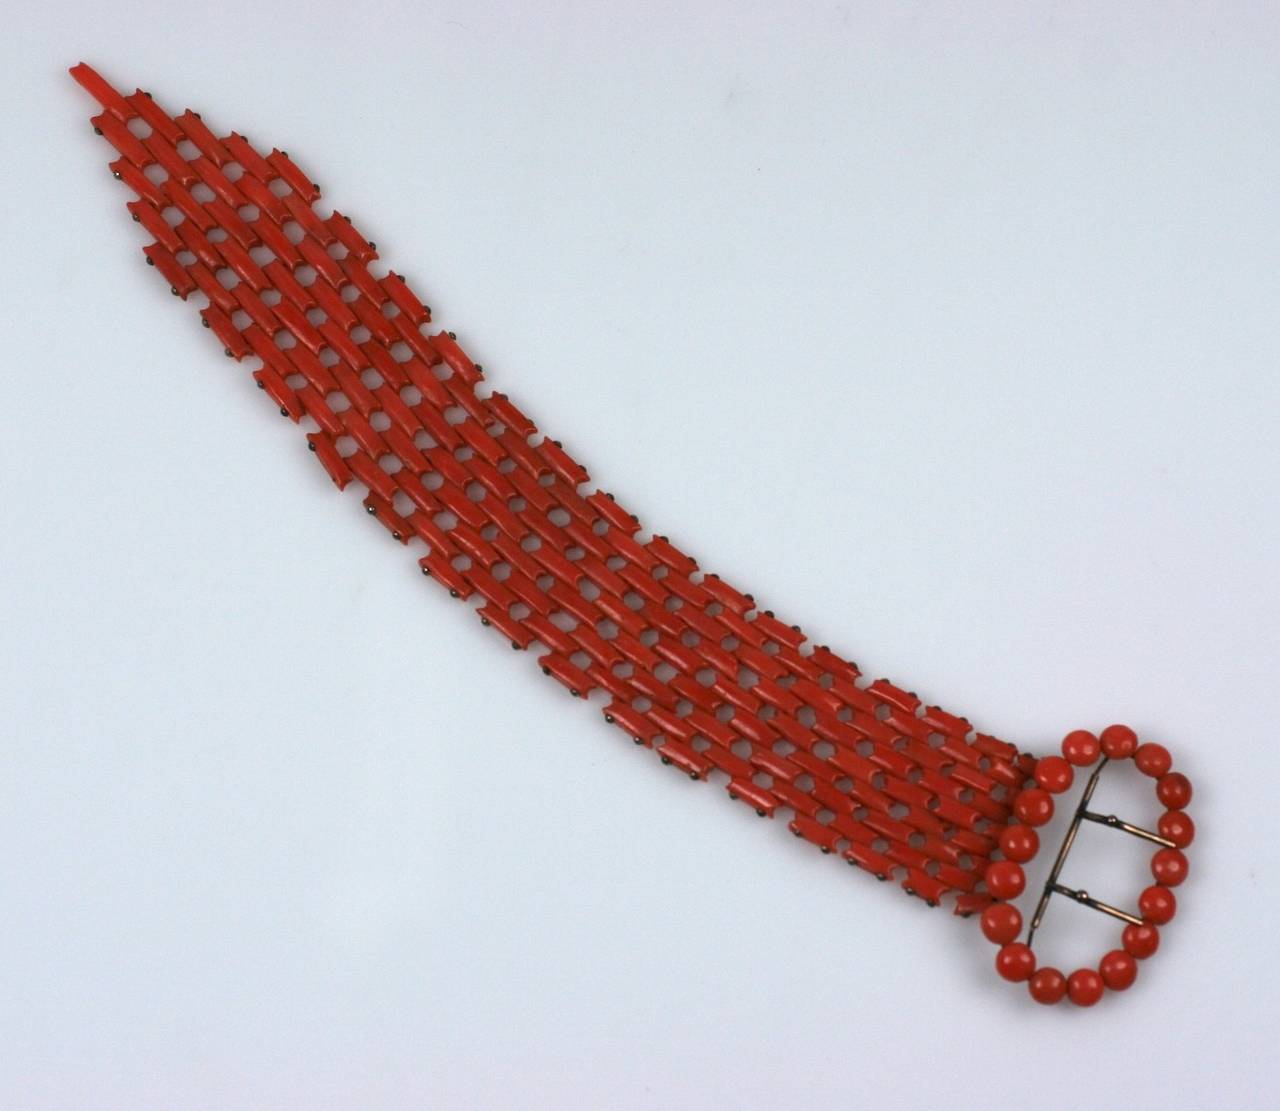 Unusual hand carved Victorian coral link bracelet with buckle motif. "Buckle" is composed of  tablet coral beads and the links are toggled together by gold pegs. Very striking scale. 1870's Italy. Excellent condition. 
9.5" x